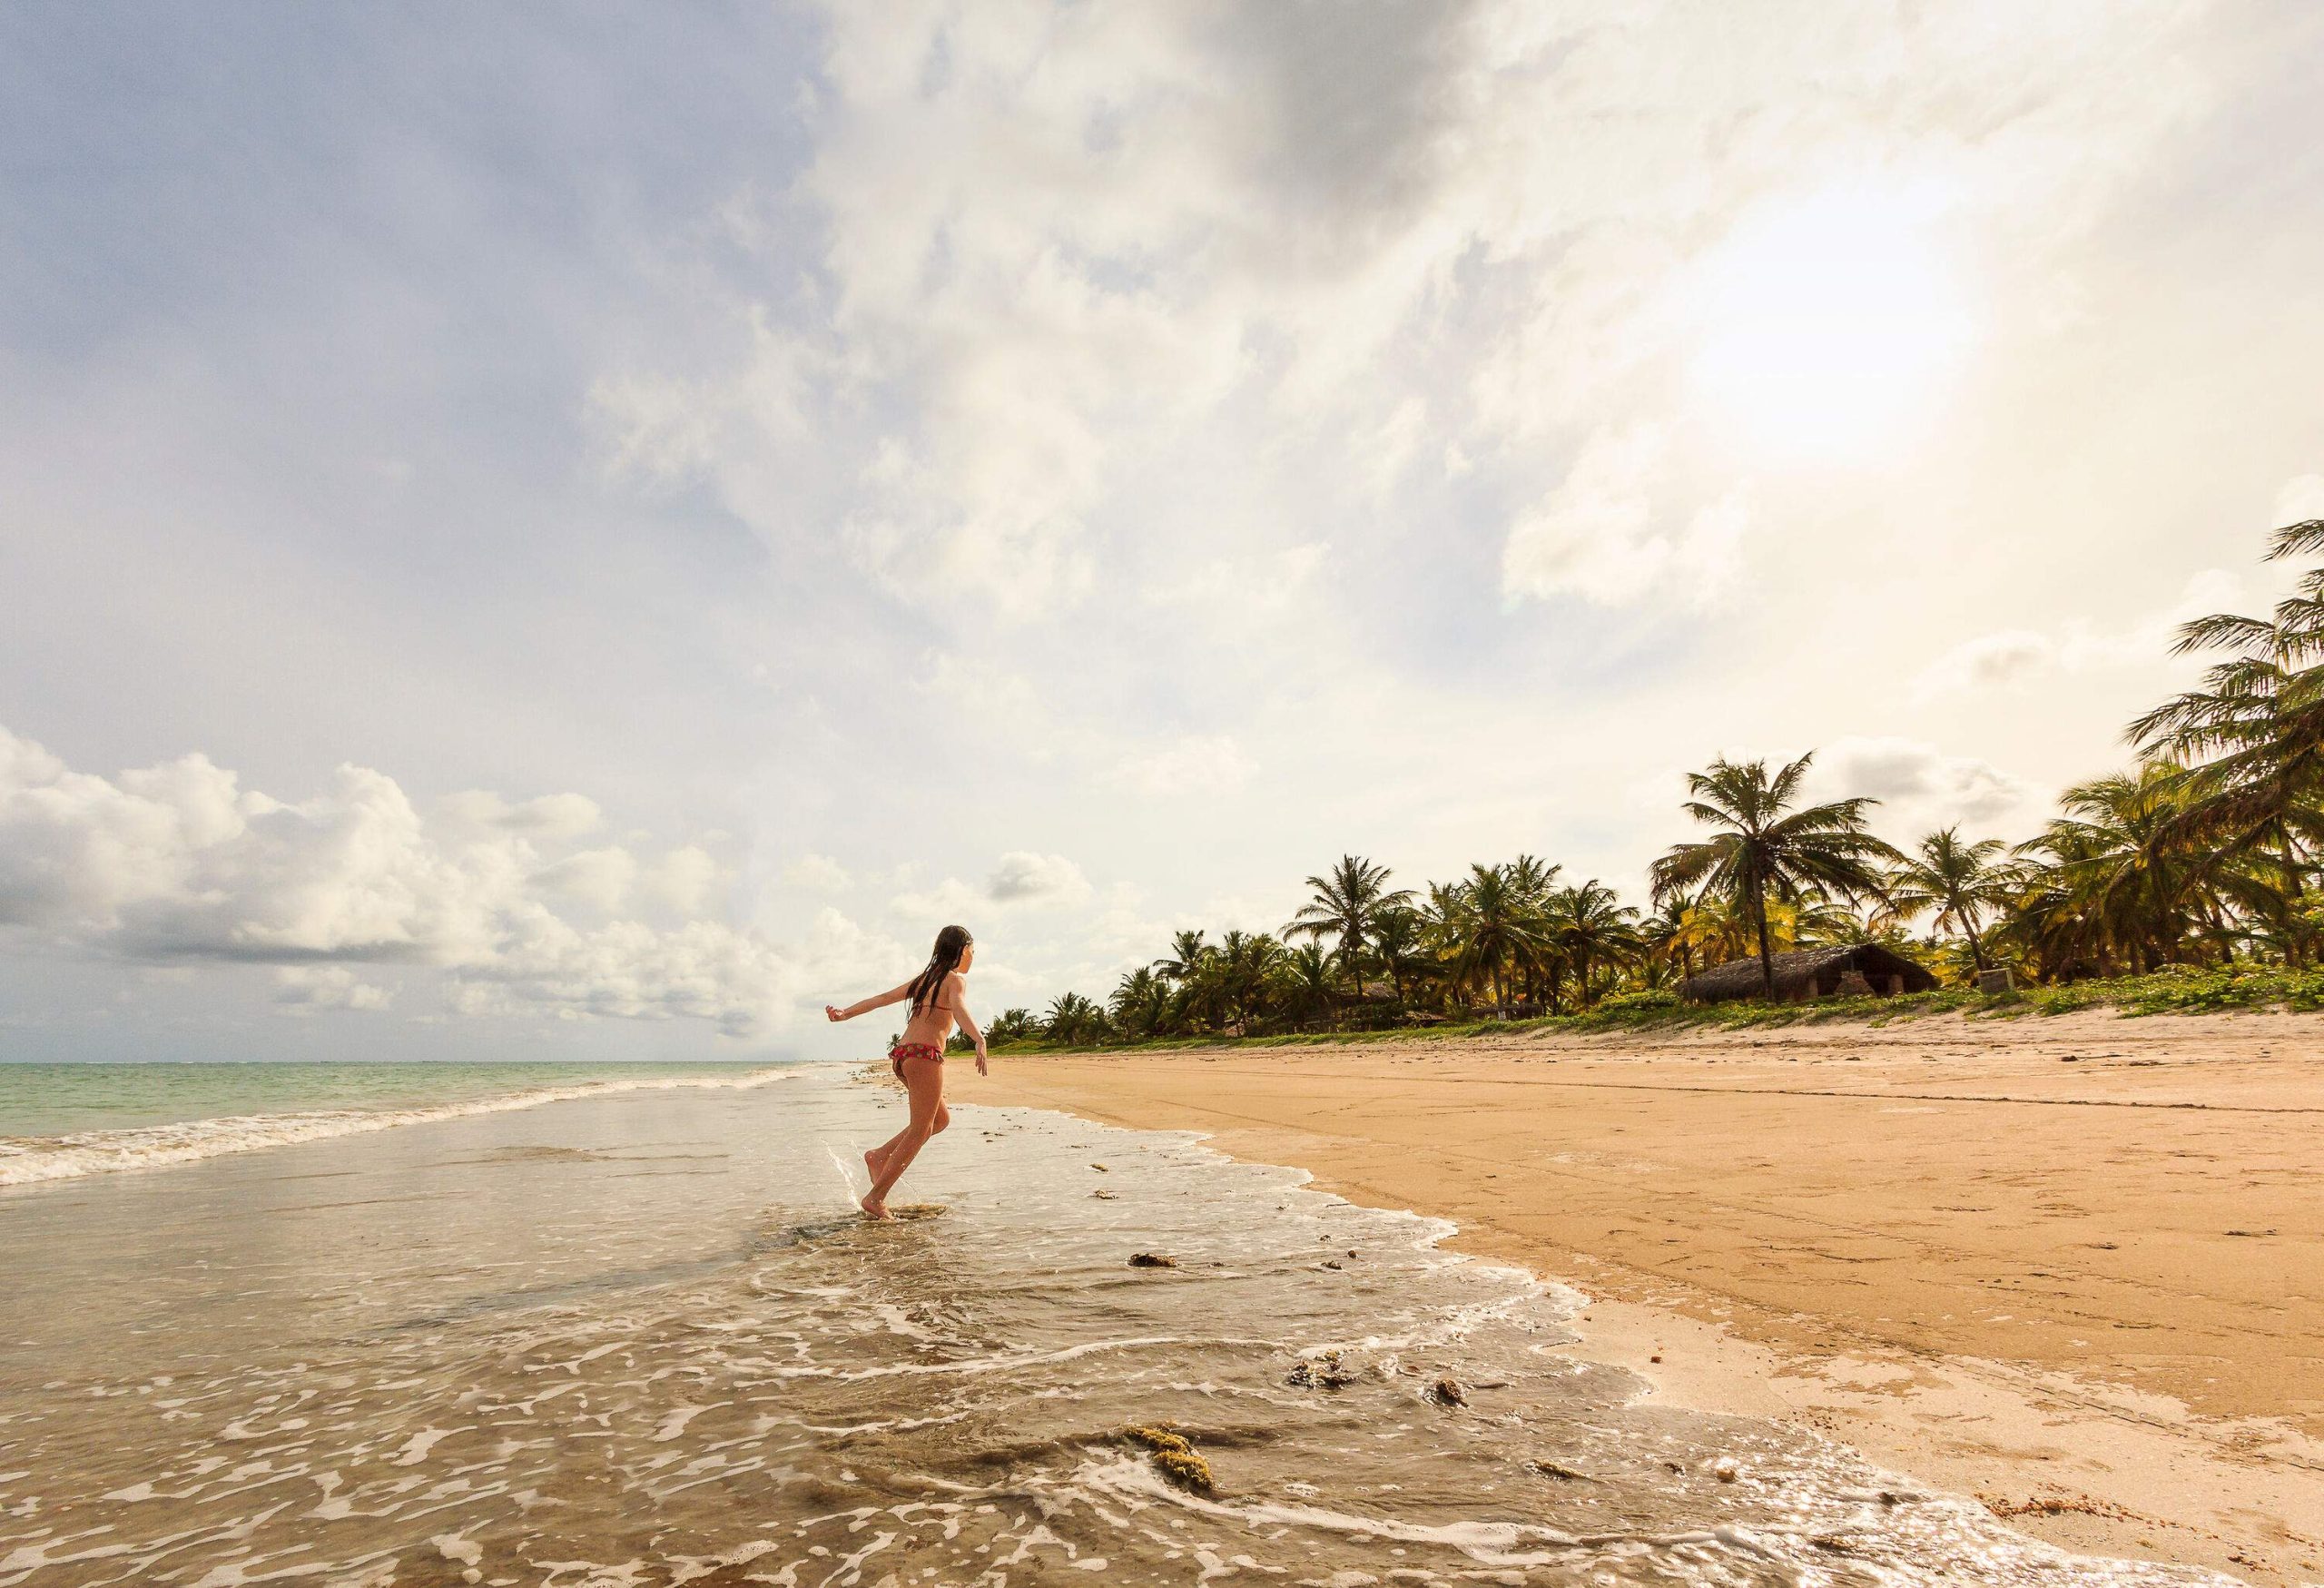 A person in a bikini joyfully runs towards the sandy beach from the water, with soft waves gently lapping the shore and tropical trees adorning the shoreline.